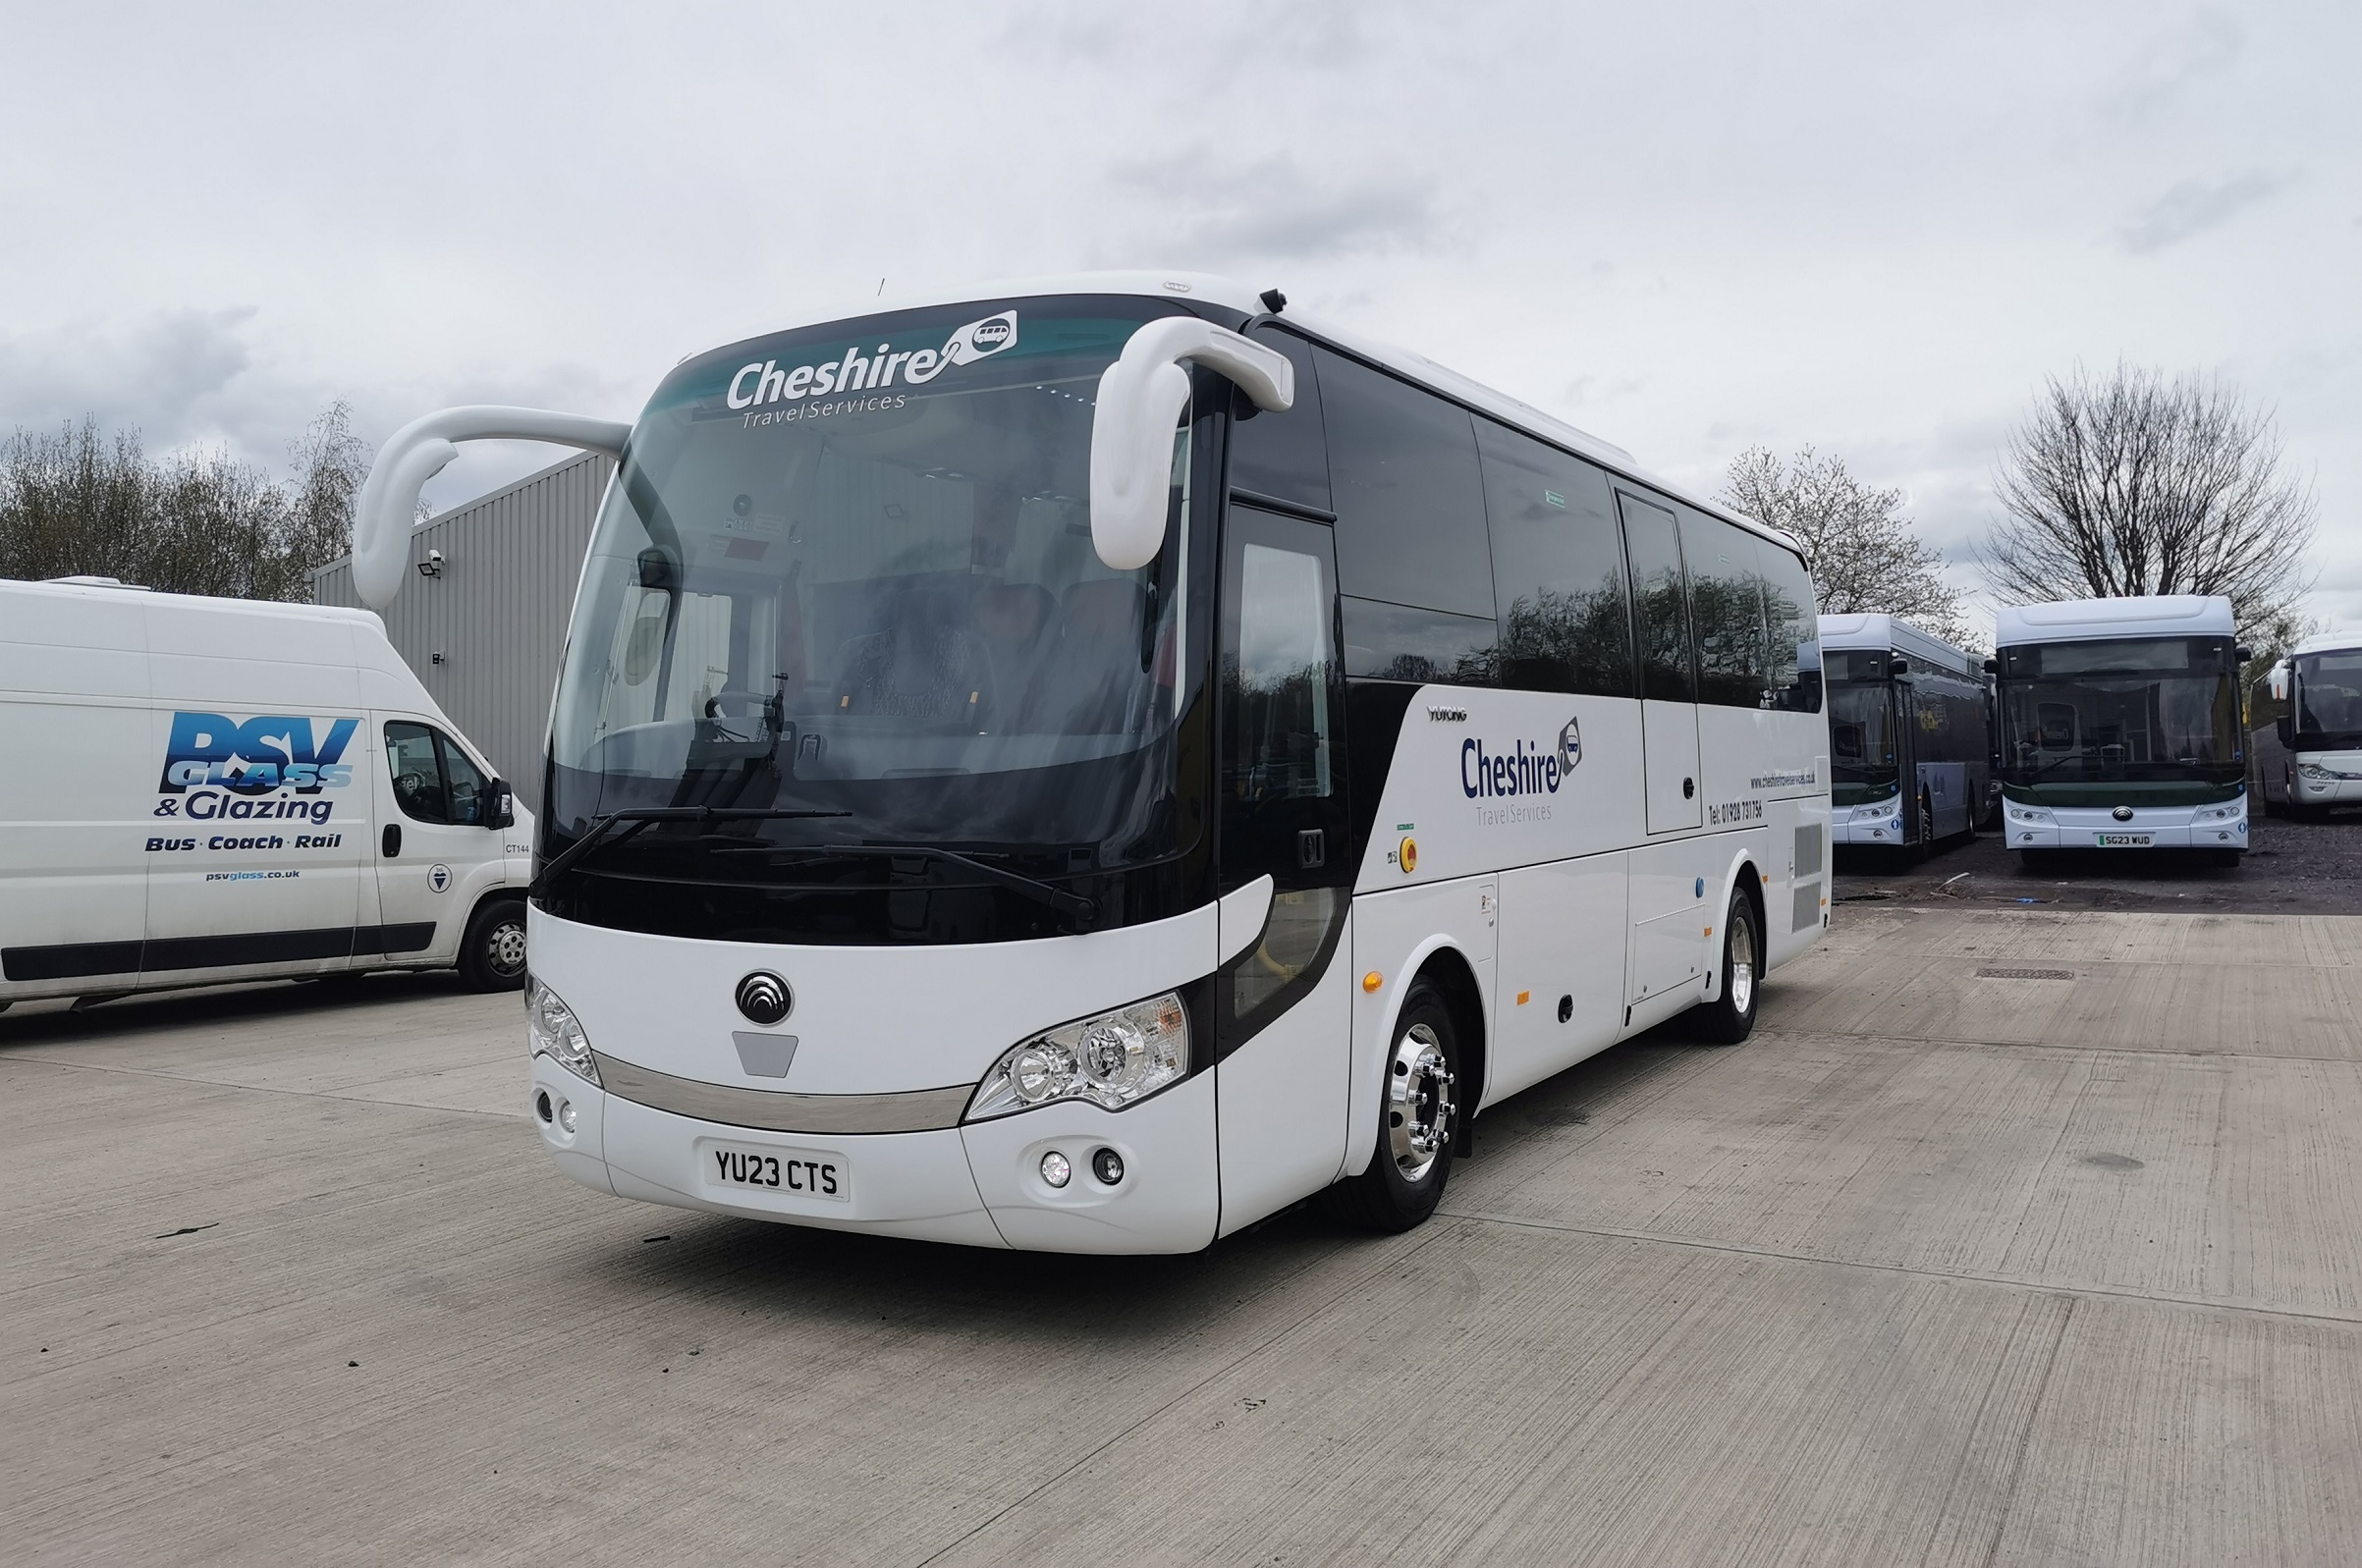 Yutong TC9 for Cheshire Travel Services